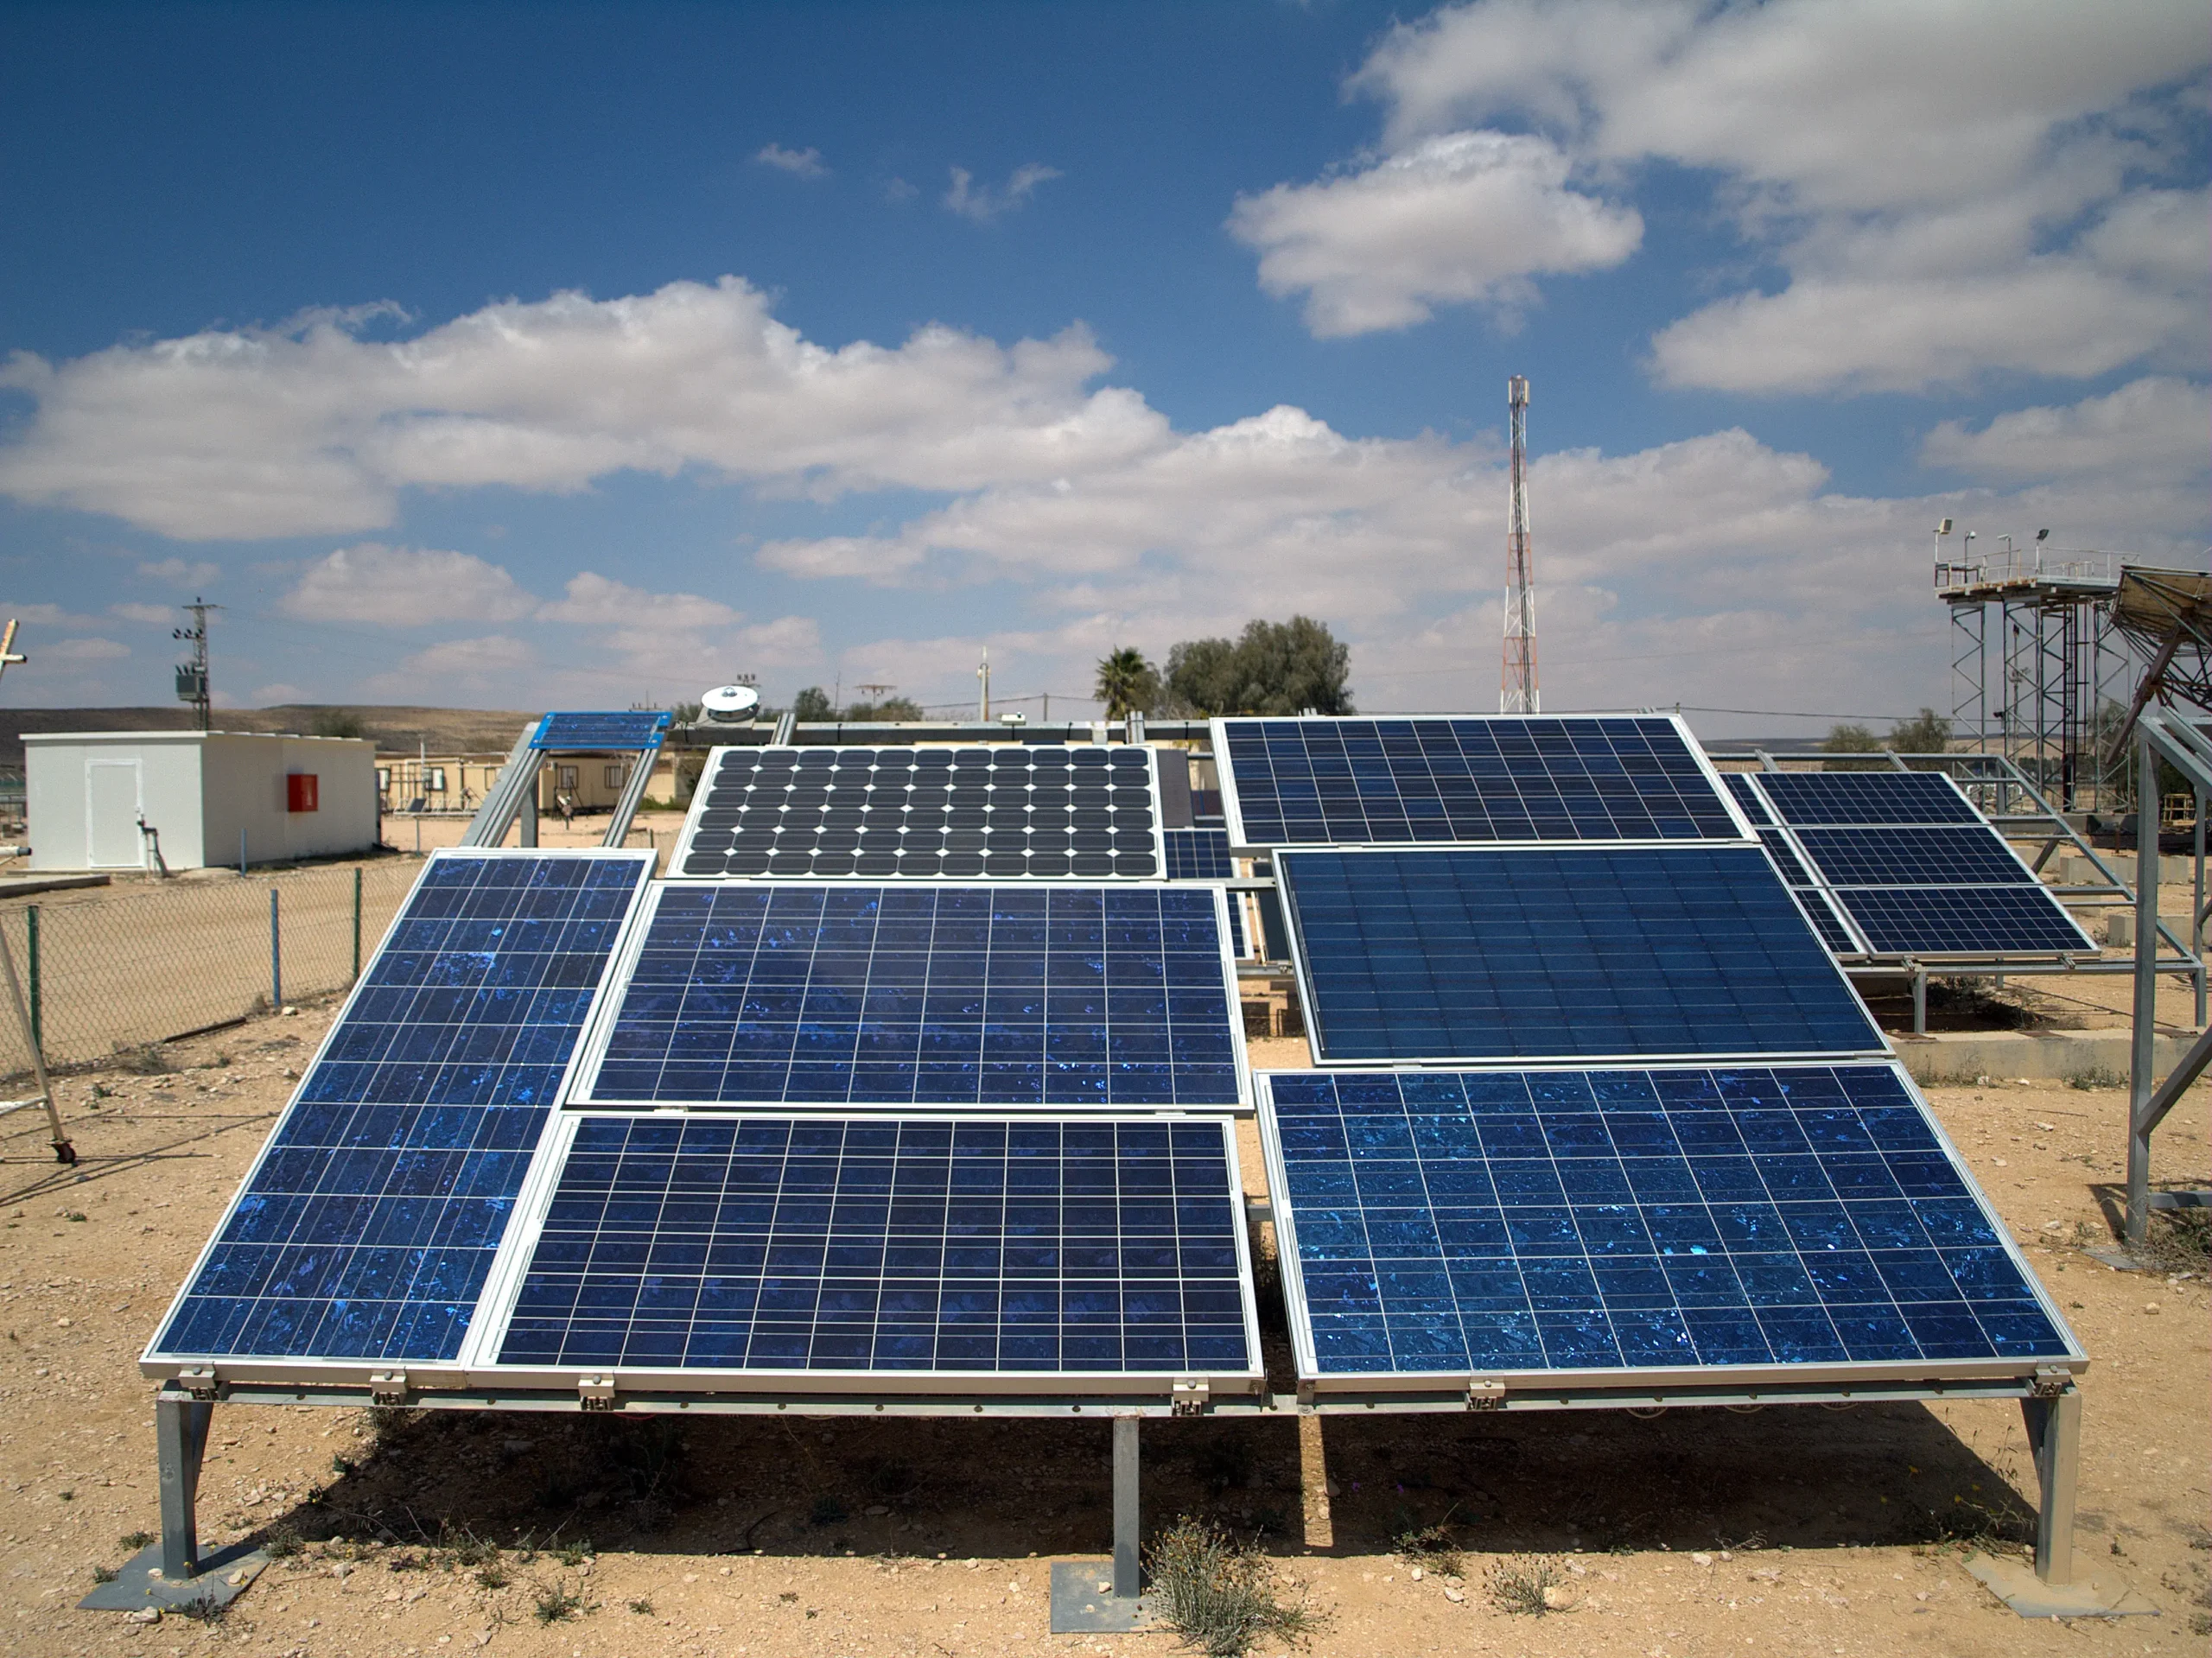 israel solar energy companies - What is the largest energy company in Israel